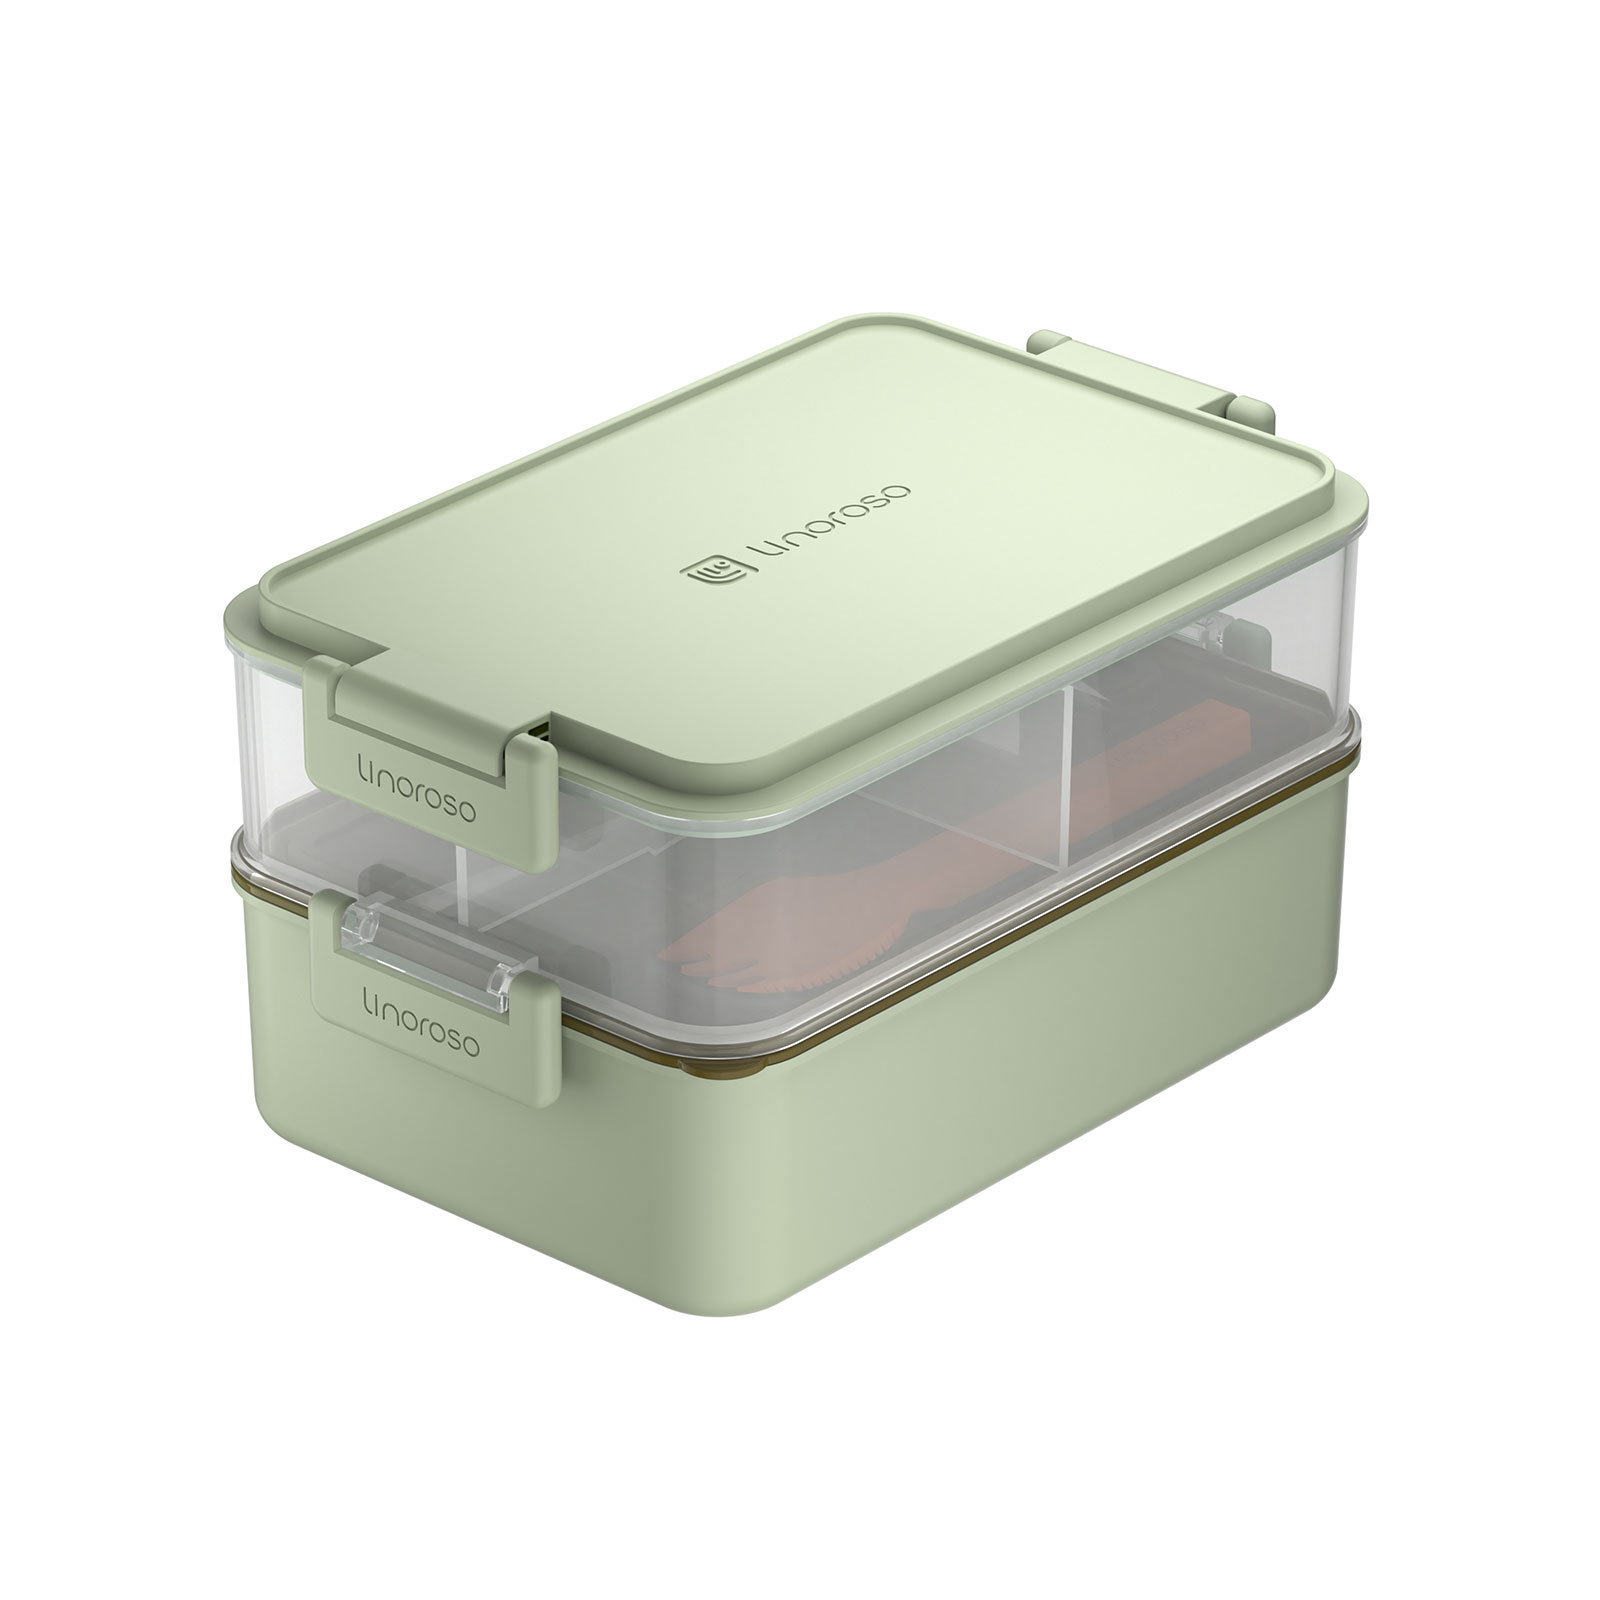 CRISTY™ Portable Insulated Lunch Container Set